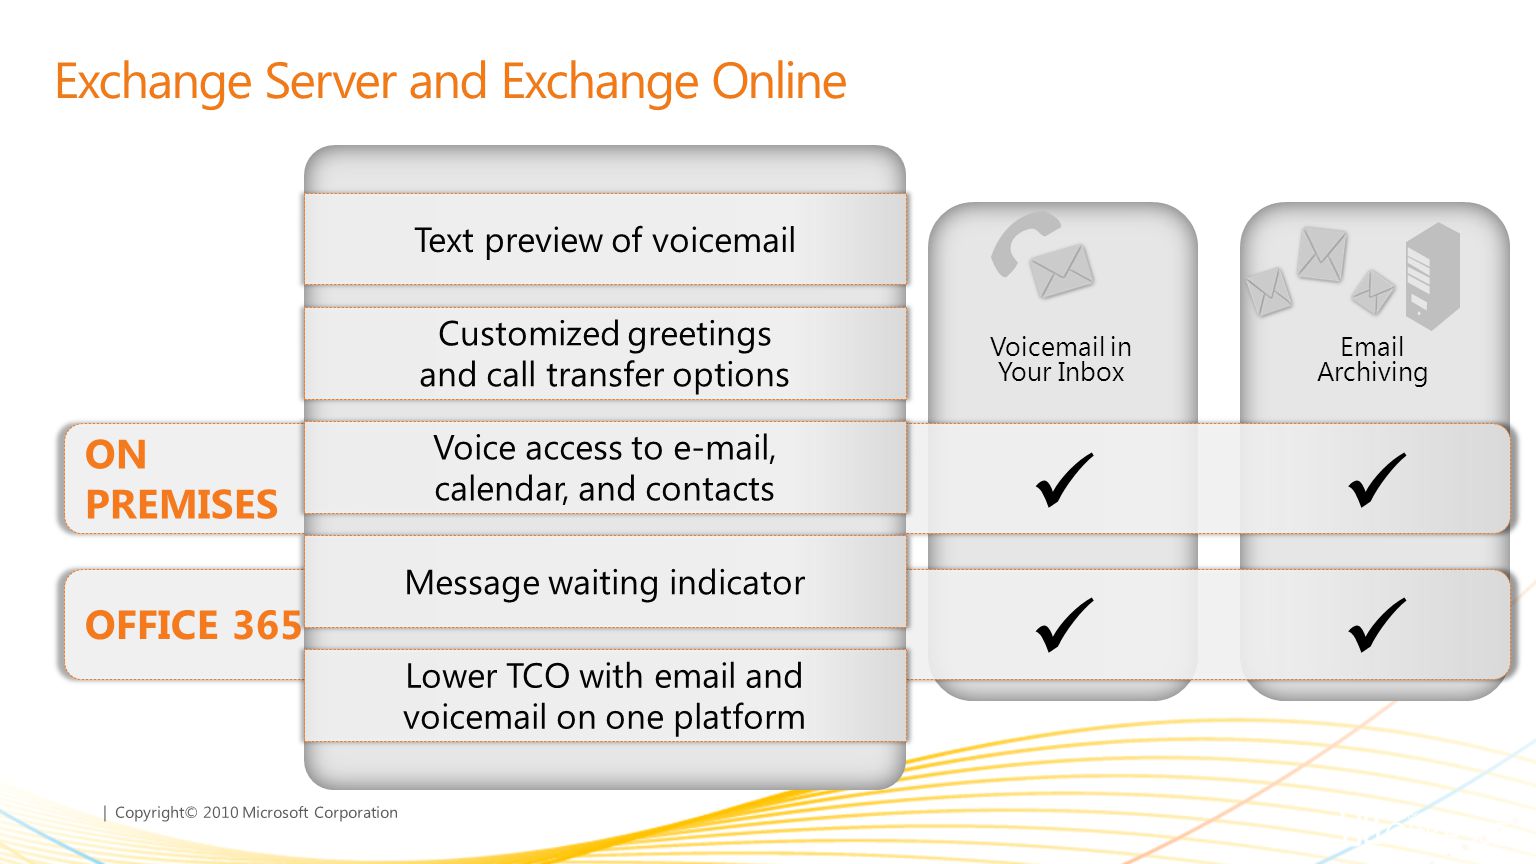 | Copyright© 2010 Microsoft Corporation Exchange Server and Exchange Online Mobile Collaboration  & Calendar Voic in Your Inbox  Archiving Text preview of voic Customized greetings and call transfer options Voice access to  , calendar, and contacts Message waiting indicator Lower TCO with  and voic on one platform